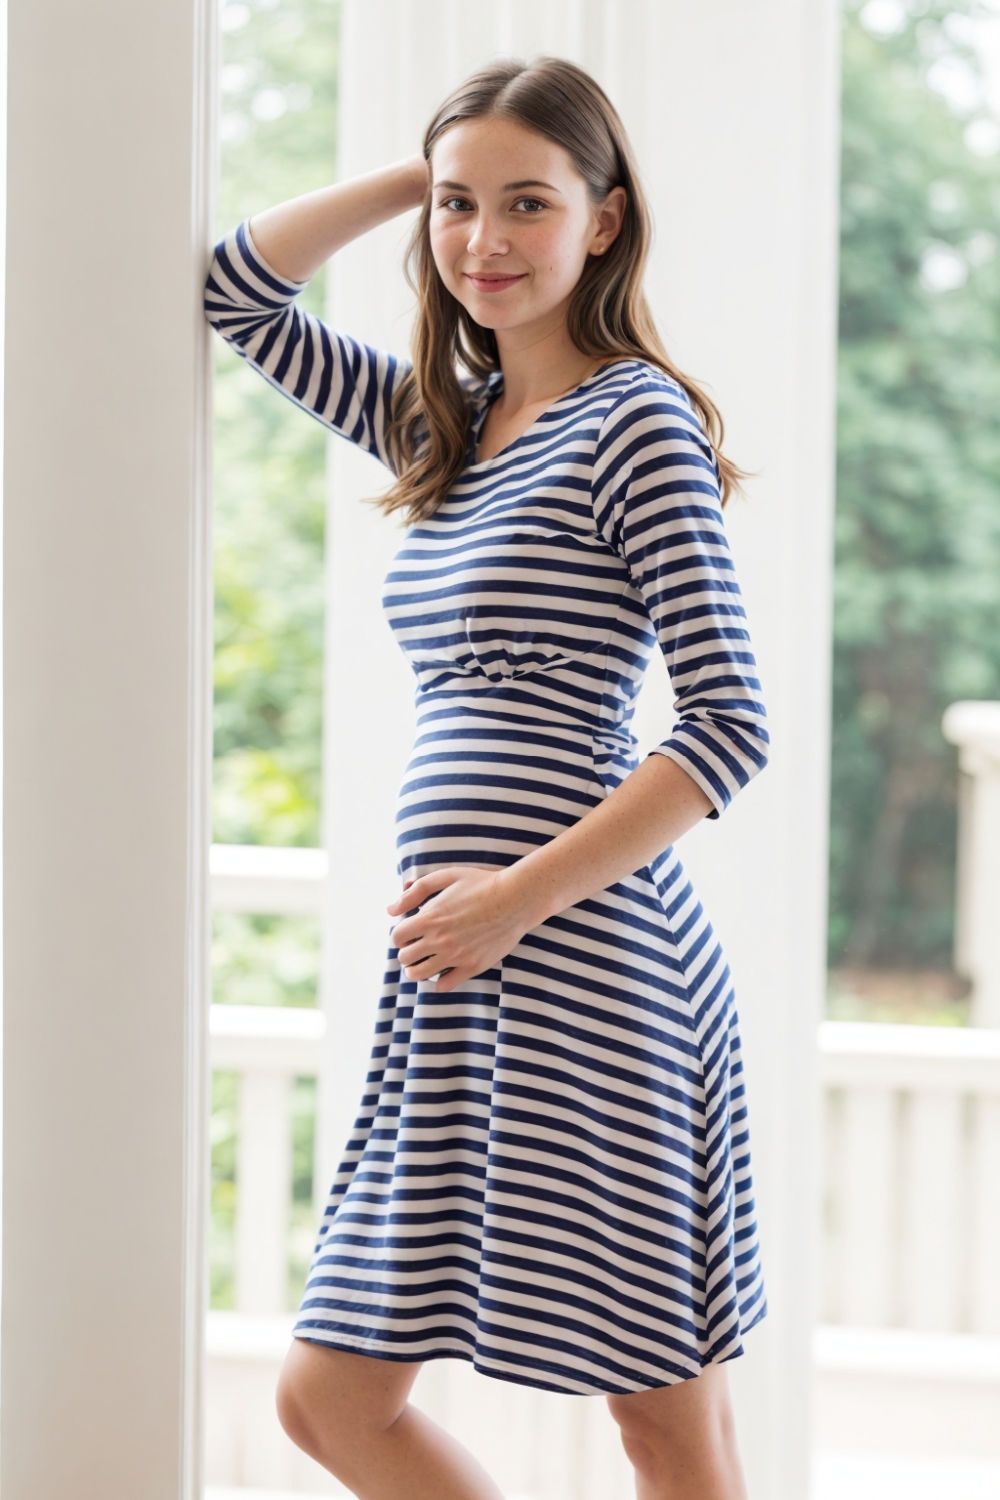 nautical striped dress for baby shower